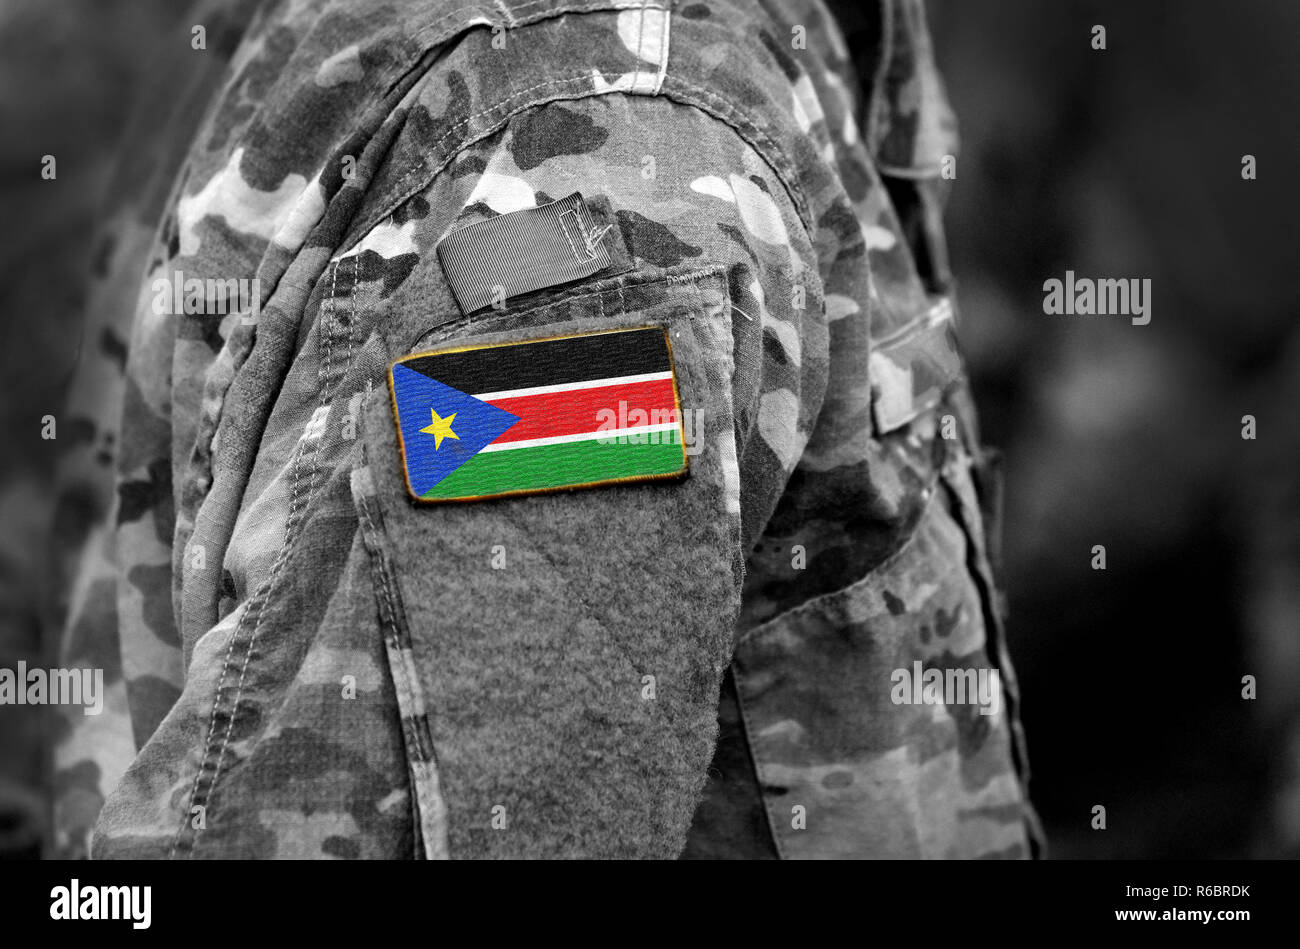 Flag of South Sudan on soldiers arm. South Sudan flag on military uniform. Army, troops, Africa (collage). Stock Photo